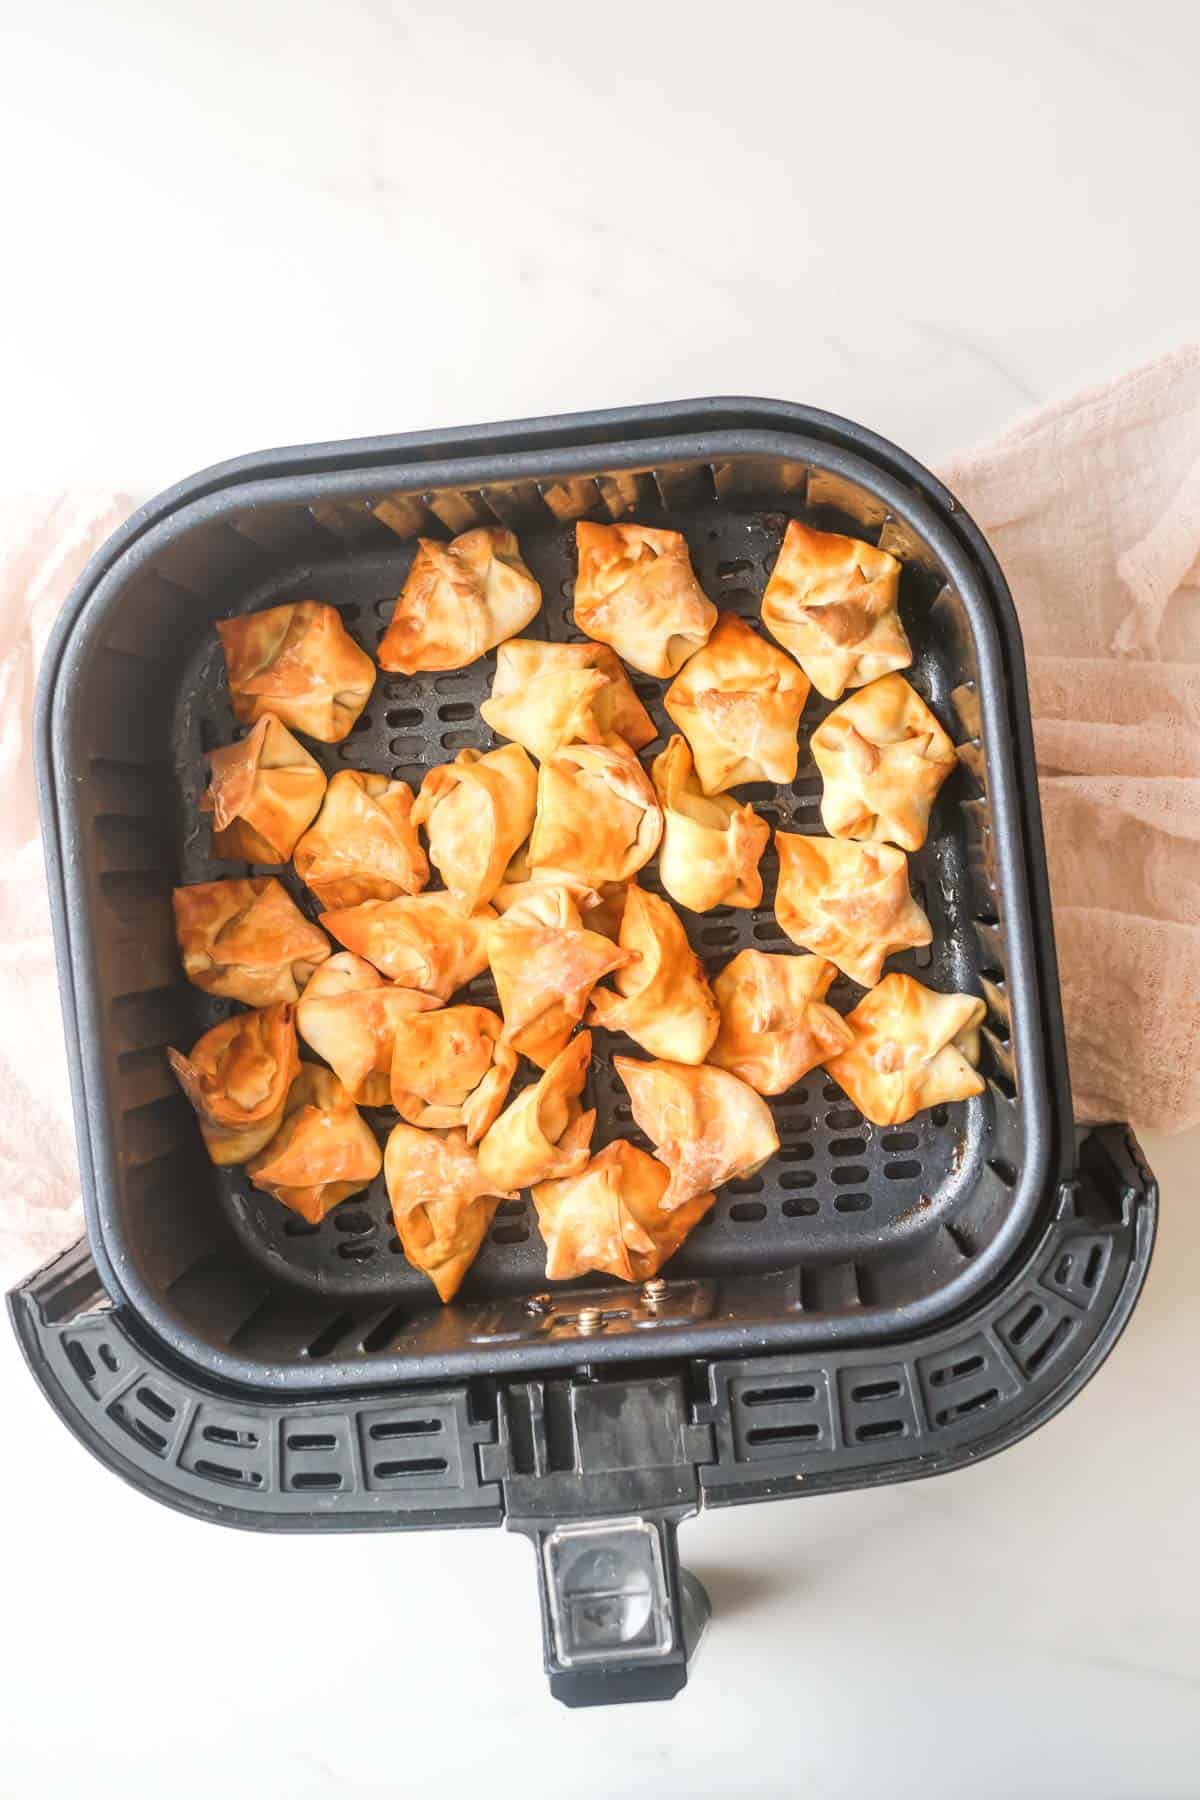 the finished air fryer wontons inside the air fryer basket